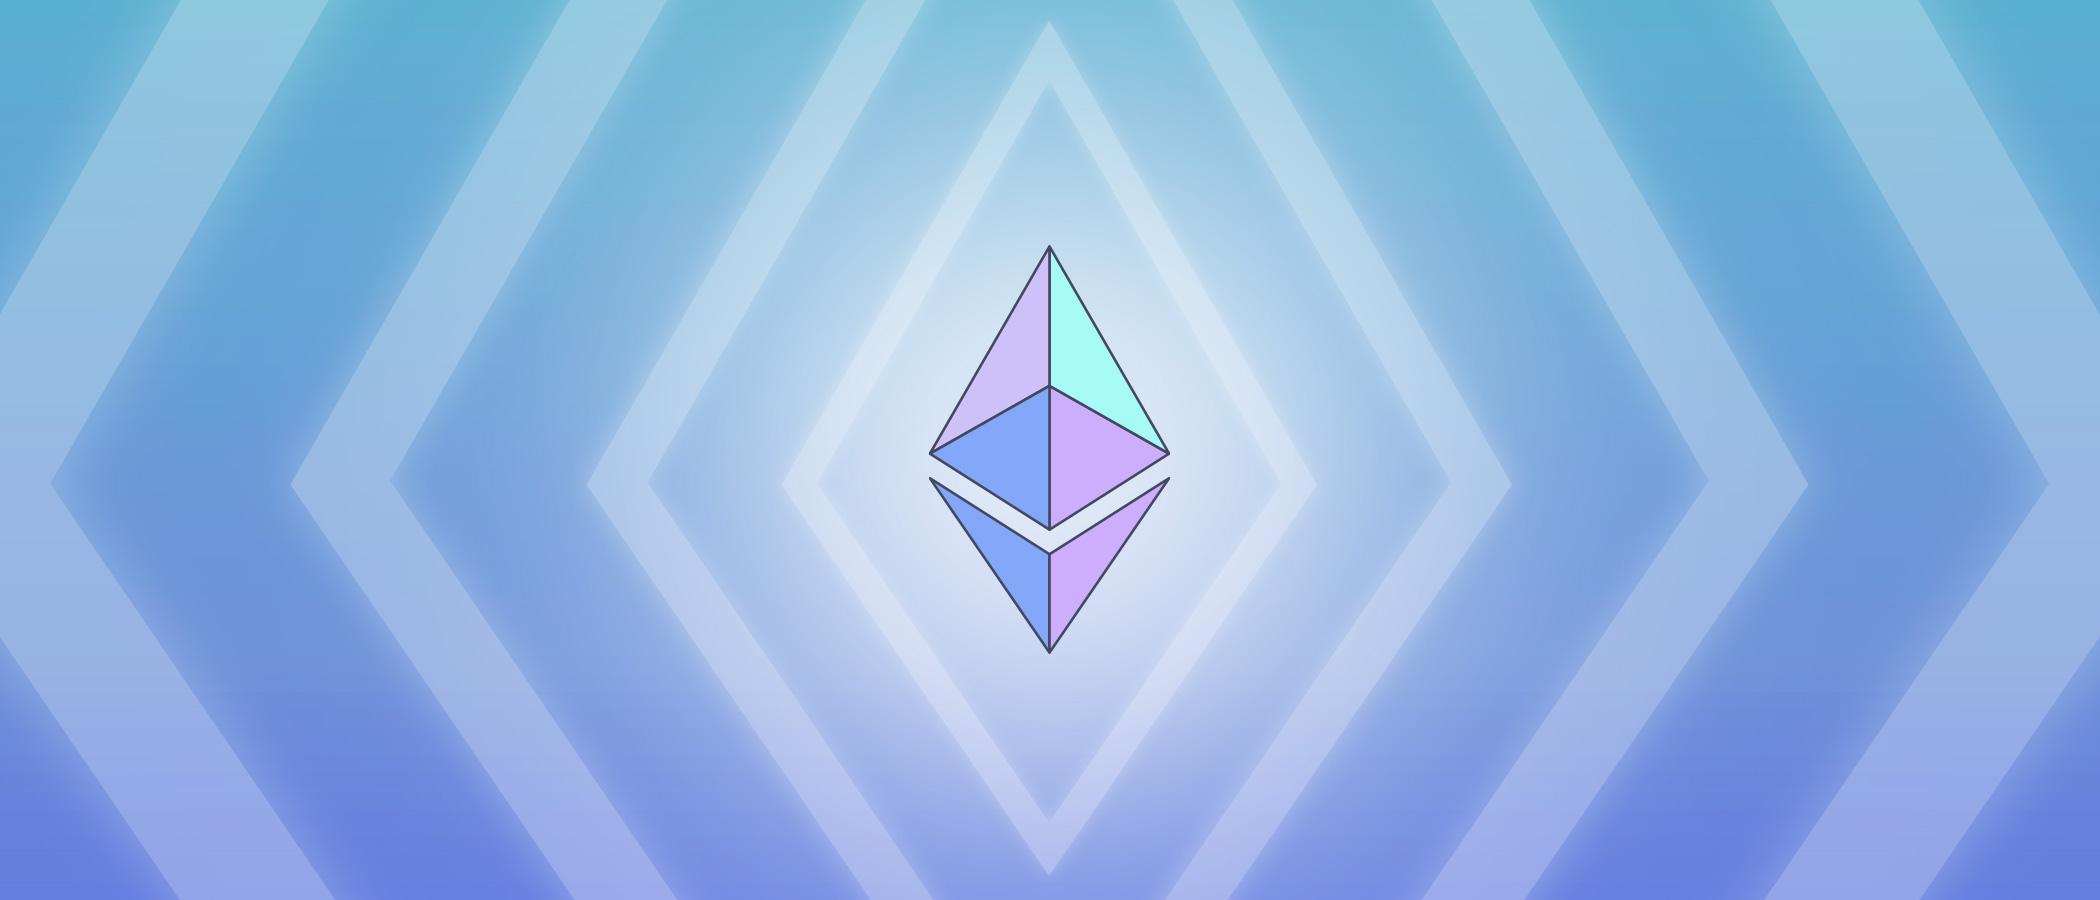 The Latest EVM: “Ethereum Is A Trust-Free Closure System”